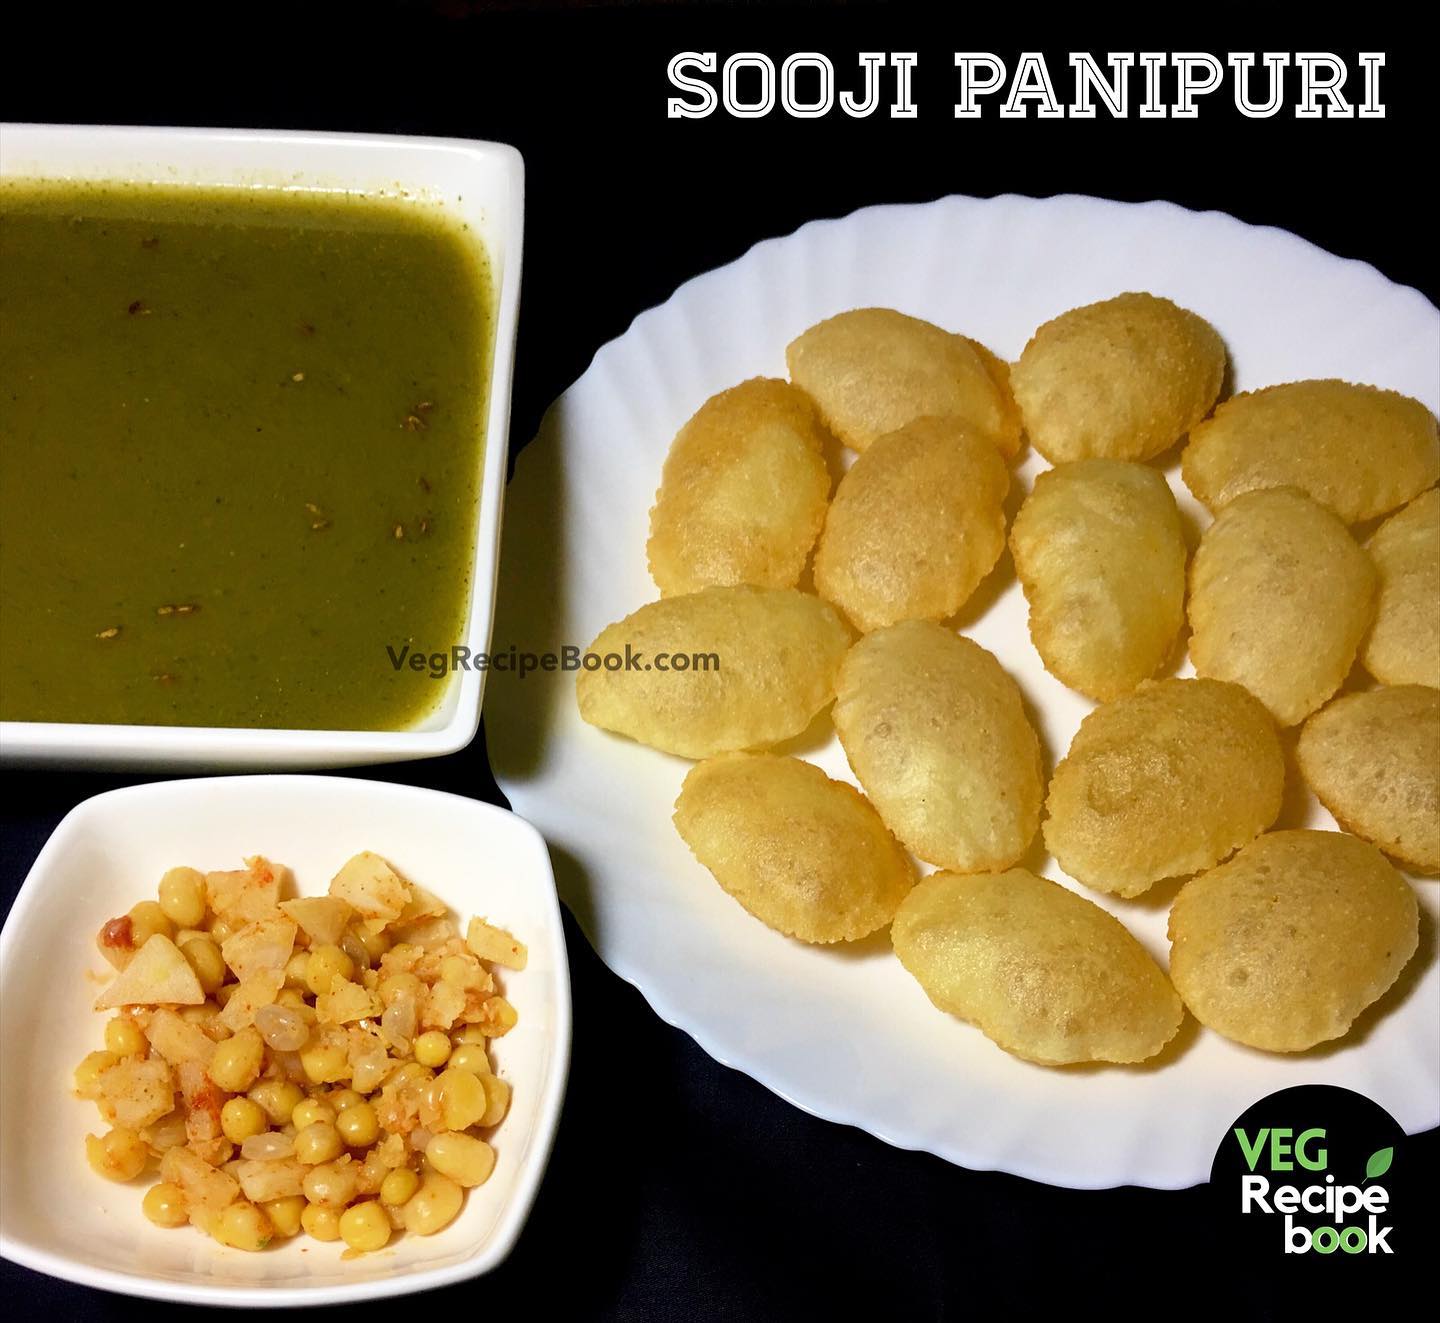 Homemade Sooji Panipuri 😋
How many plates can you eat in one go❓
Comment down below 👇 
.
.
.
Follow me @thevegrecipebook for more amazing and delicious recipes.
.
.
.
#soojipanipuri #panipuri #panipurilovers #panipurishots #panipurilover #panipurilove #golgappe #sujipanipuri #sujigolgappe #golgappa #golgappelovers #fuchka #fuchkalover #puchka #puchkas #puchkalovers #vegrecipebook #itsmegrd #garuskitchen #homemaderecipe #gharkakhana #homemadepanipuri #homemadefood #homechefindia #indianhomecooking #indianstreetfood #streetfood #streetfoodindia #streetfoodlover #foodiesofindia